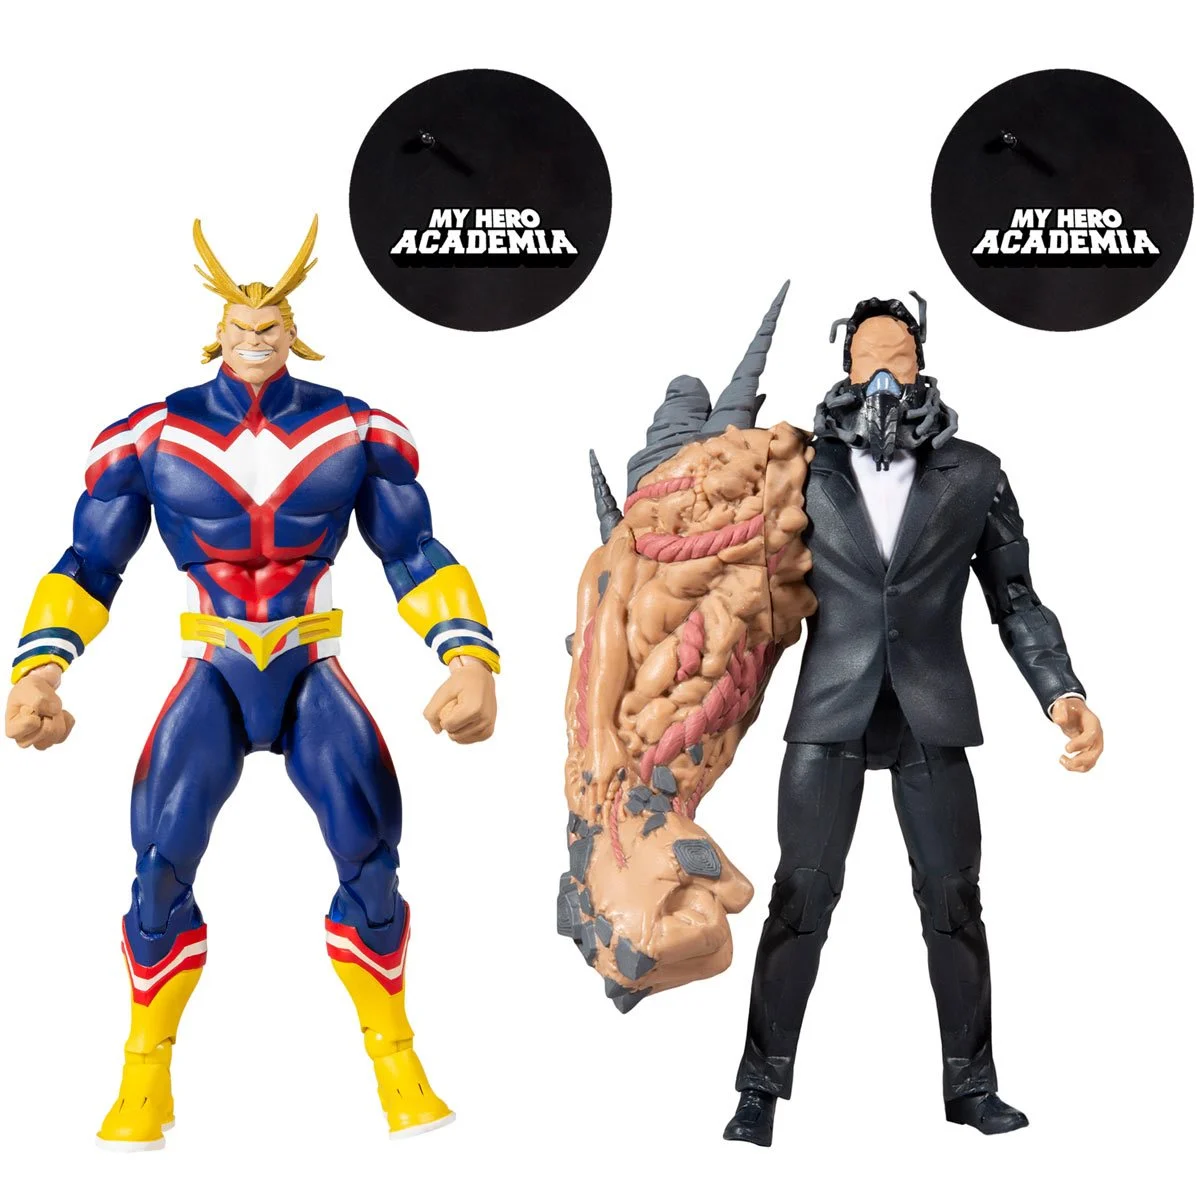 My Hero Academia - All Might vs All for One Action Figure 2-Pack